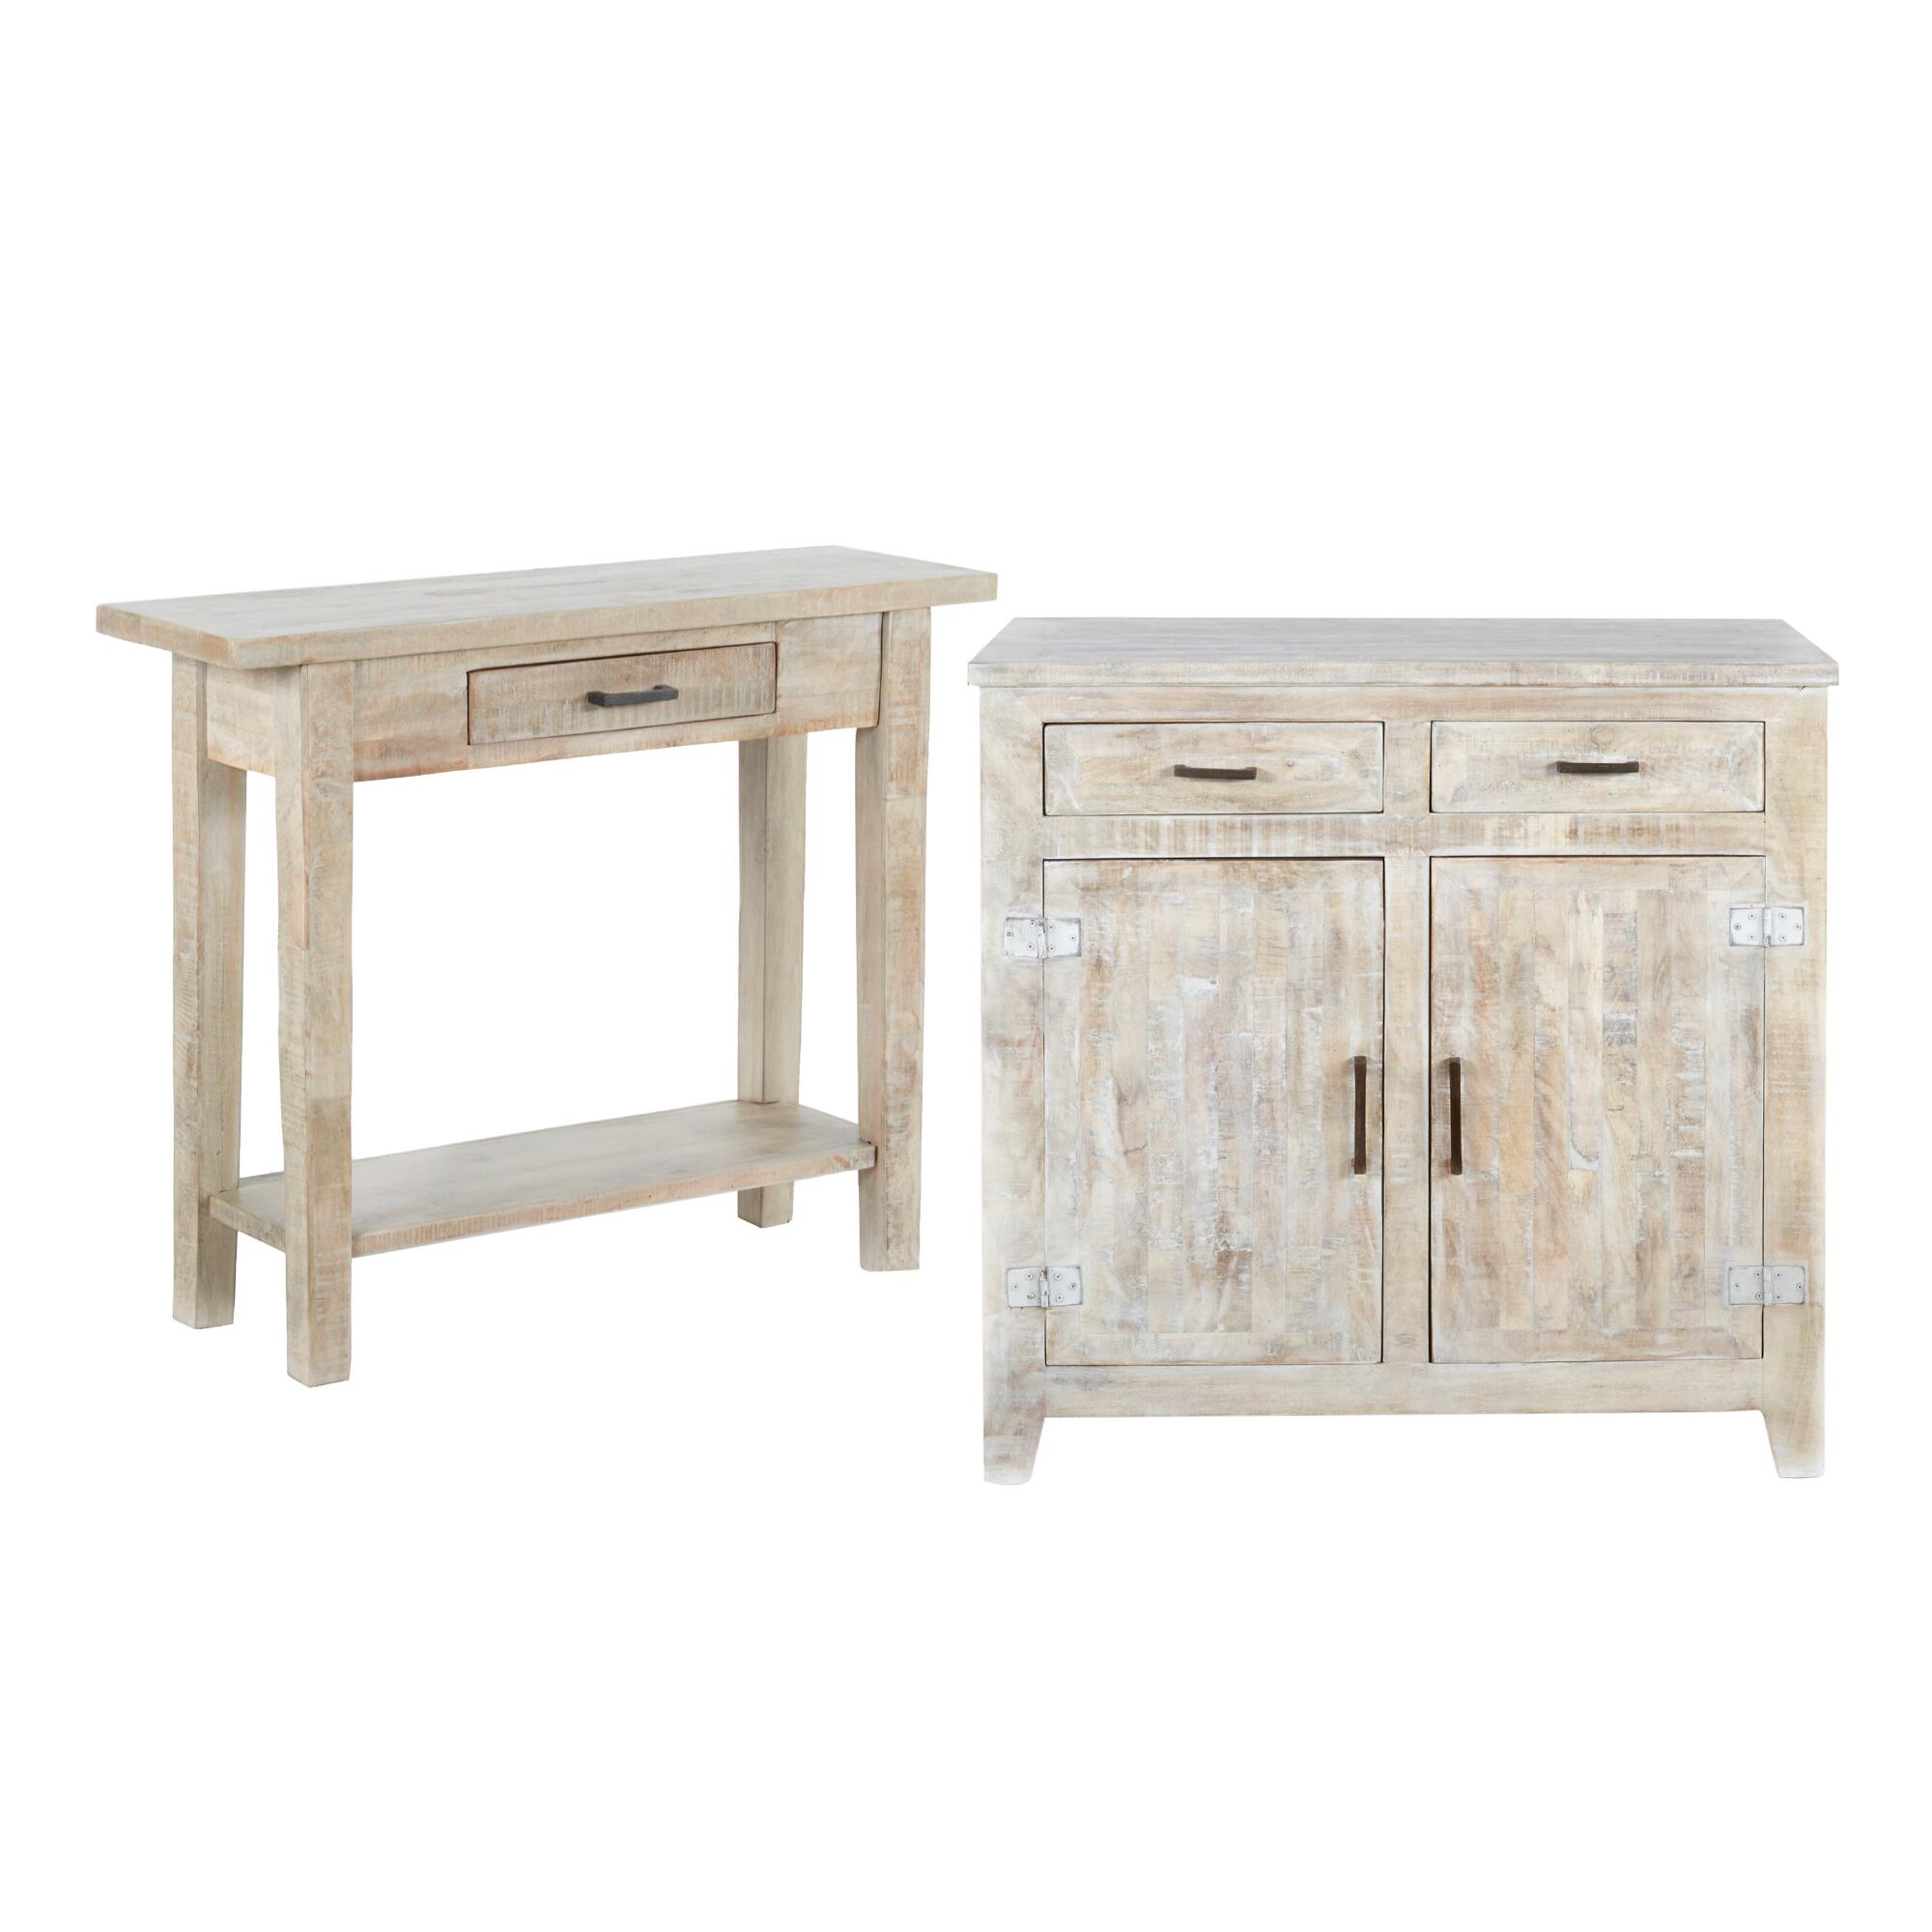 Whitewash Wood Leigh Living Furniture Collection by World Market